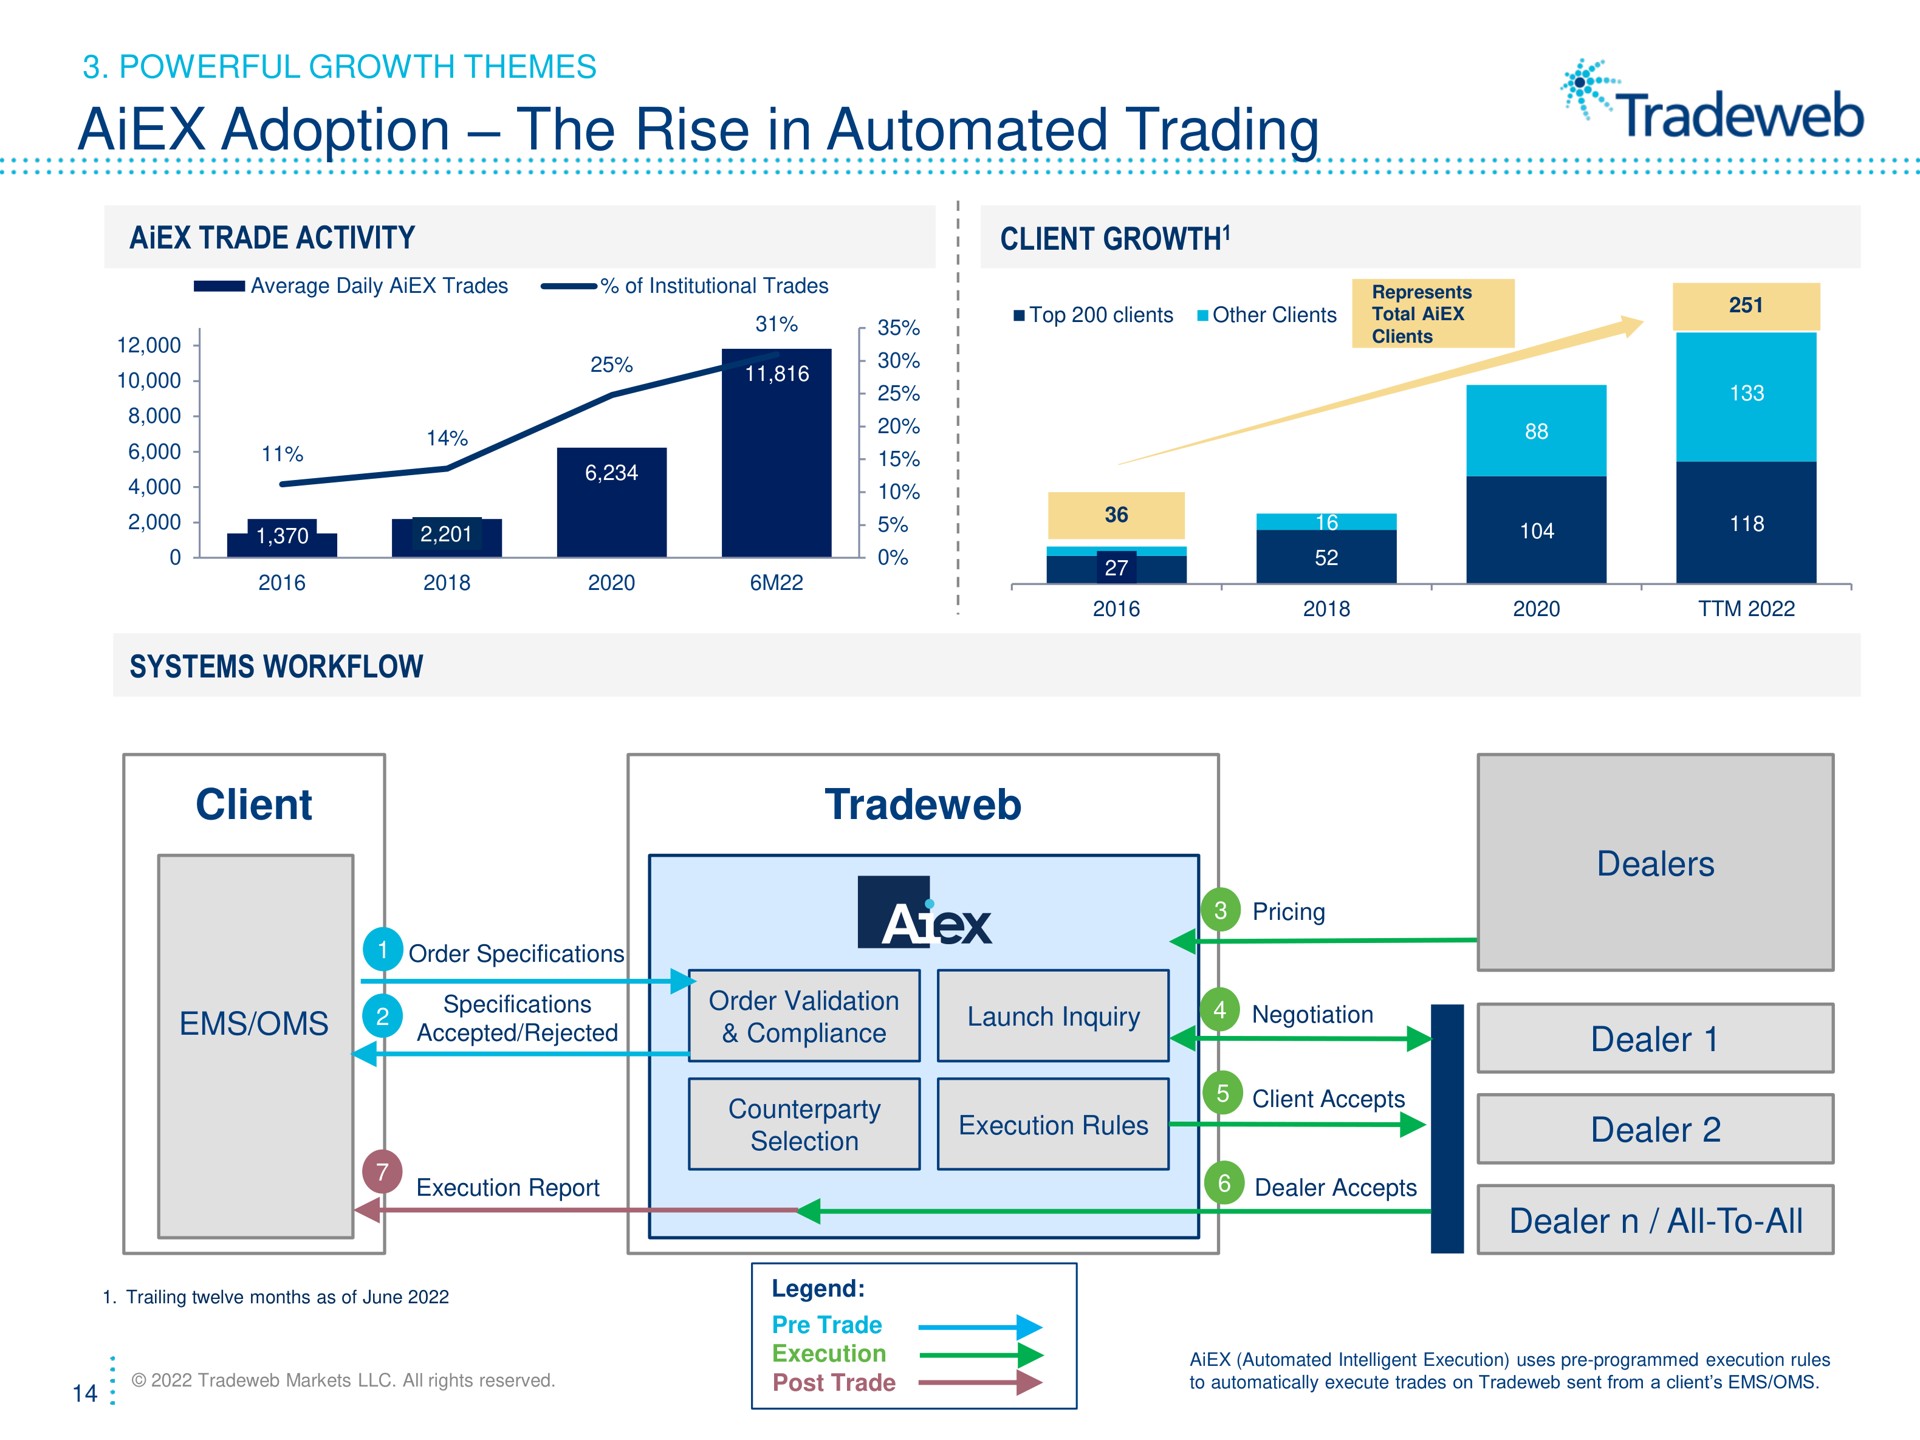 adoption the rise in trading client dealers dealer dealer dealer all to all powerful growth themes trade activity systems growth | Tradeweb